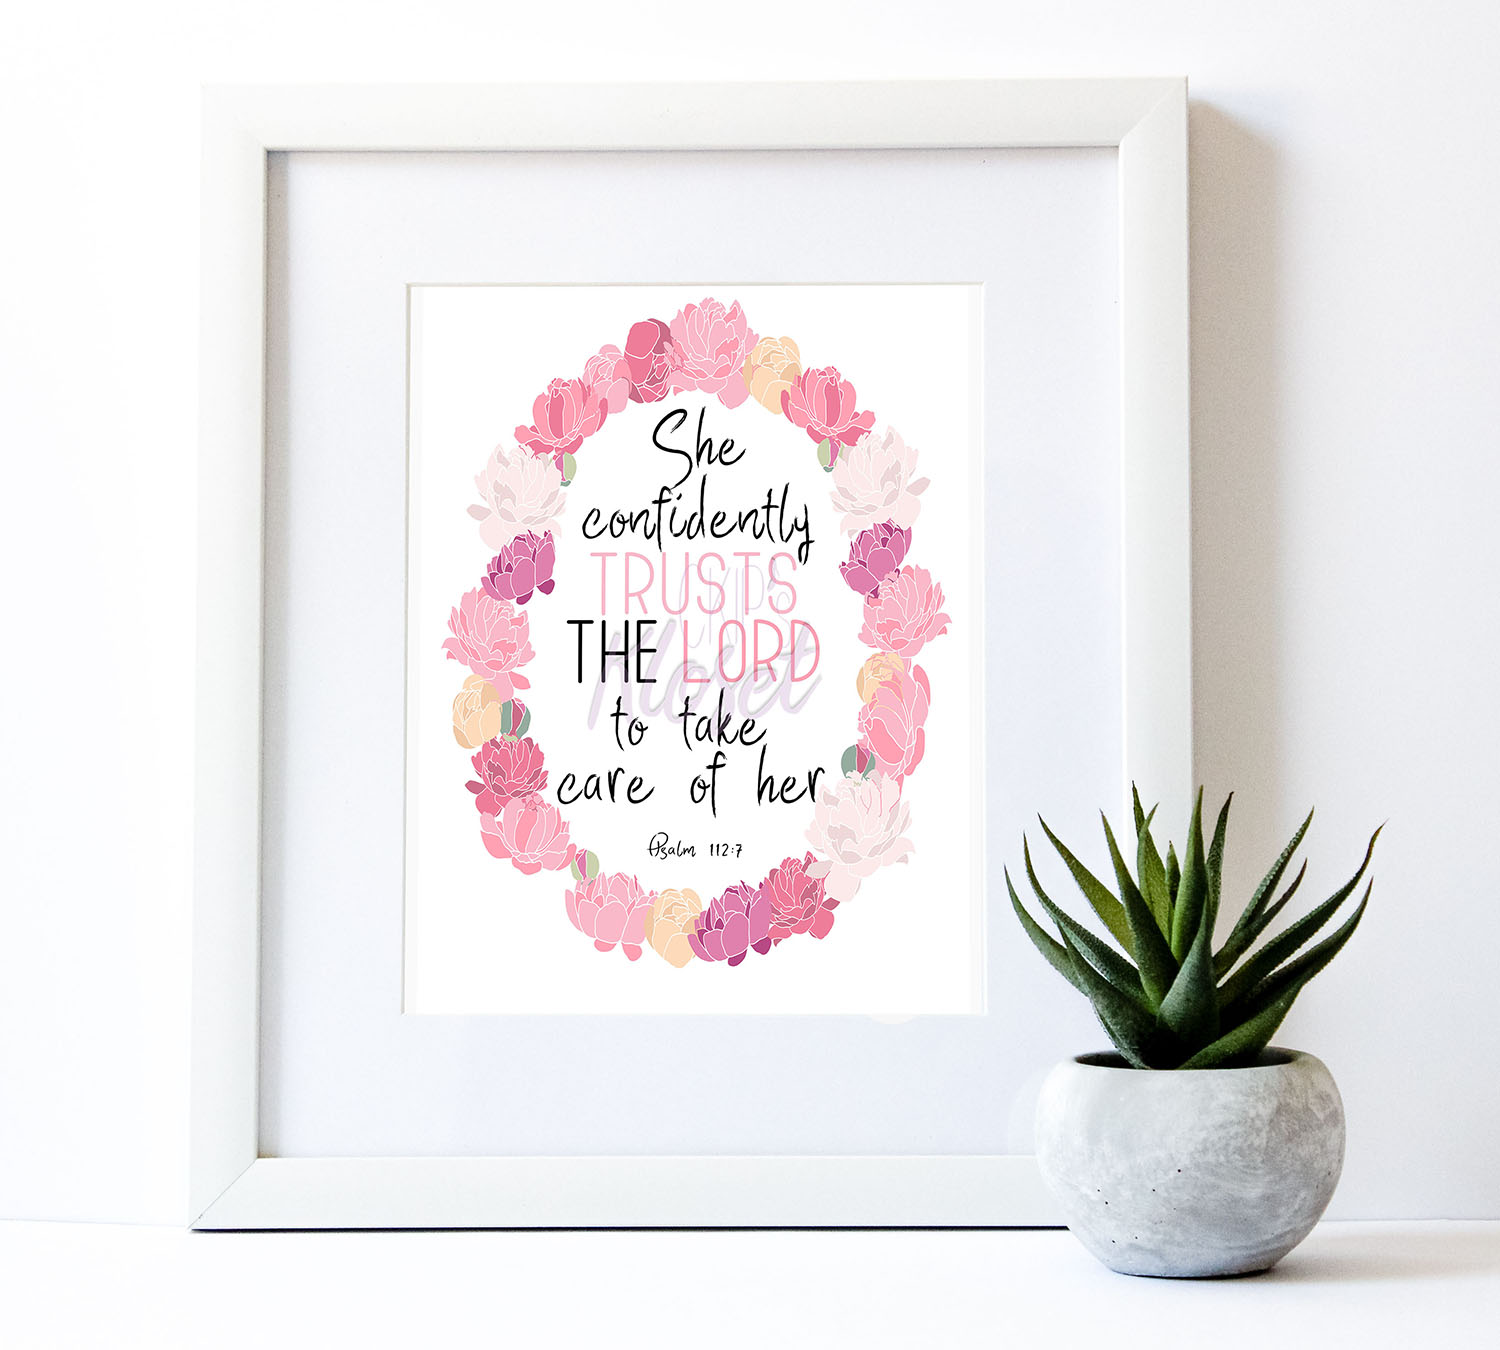 She Confidently Trusts The Lord Psalm 112 7 Art Decor 